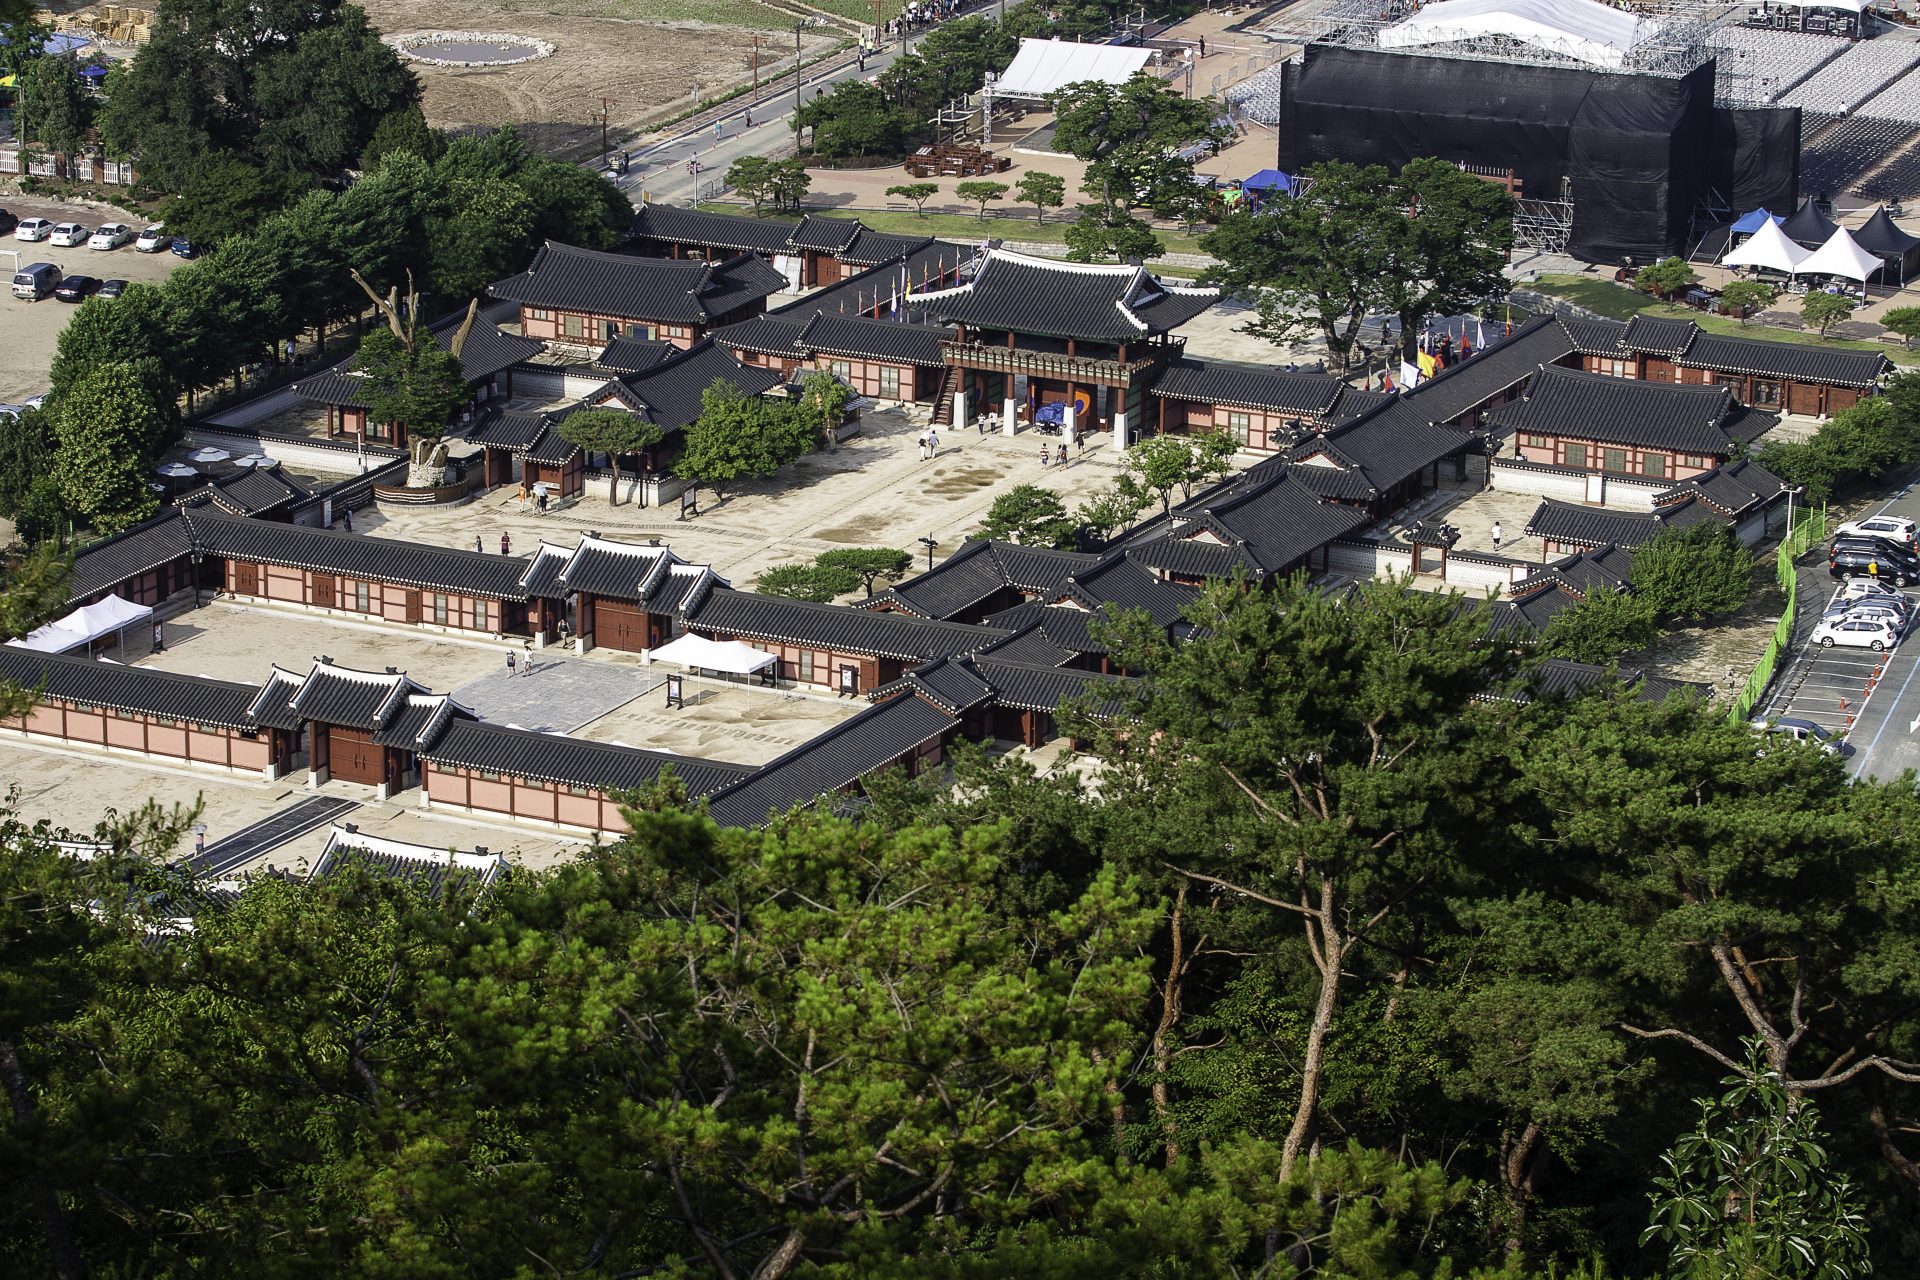 <p>Although it was a temporary palace for the king within the Suwon Hwaseong Fortress, the castle was built as a formal palace. It was large and frequently used. Since then, it has been a filming location for several dramas and movies. In the surrounding area, there are many trendy cafes and general stores.</p>